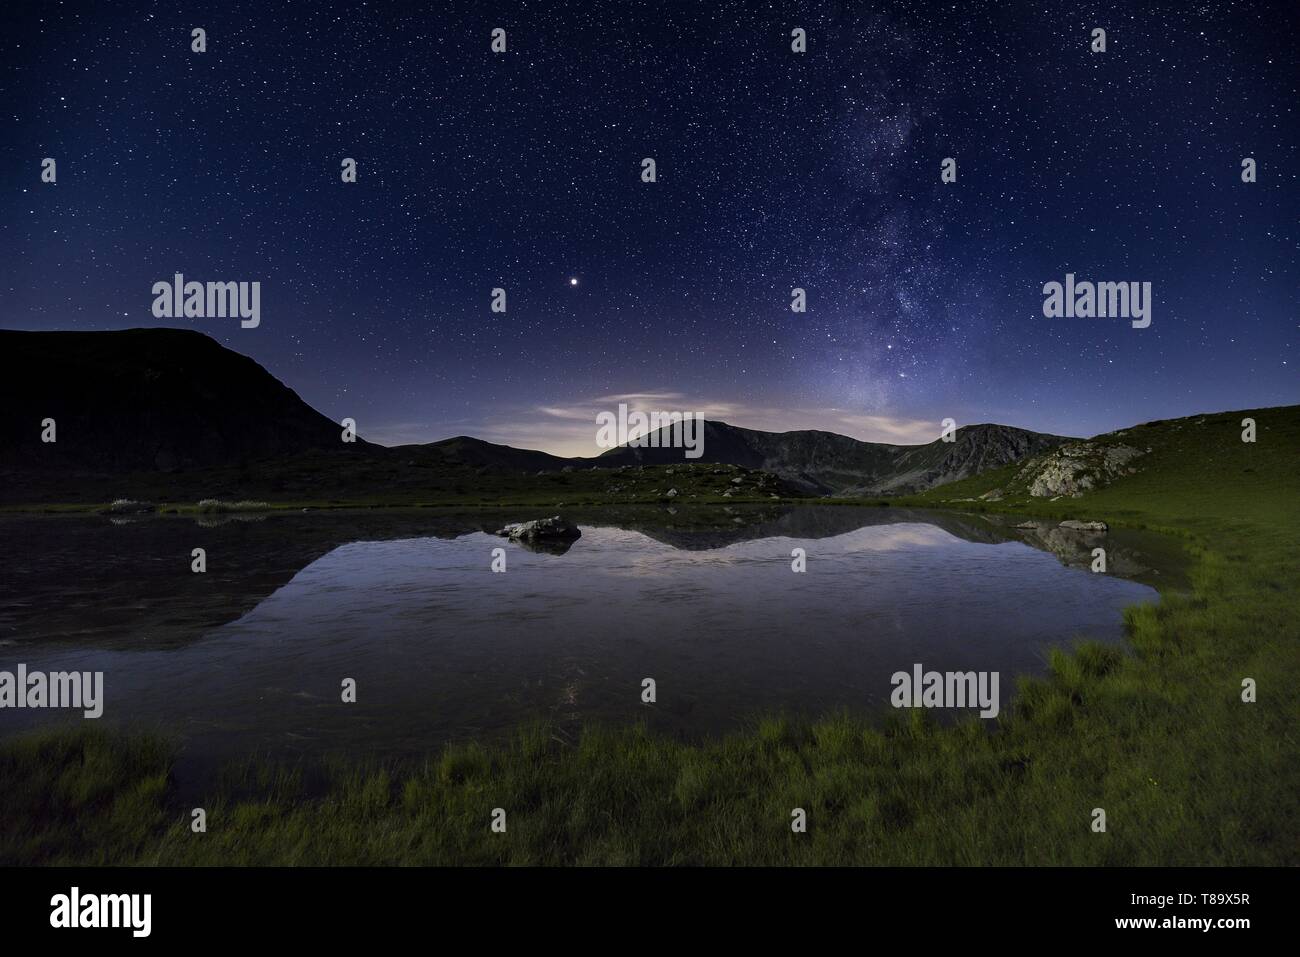 France, Alpes Maritimes, Mercantour National Park, Haute Vésubie, Madone de Fenestre valley, bivouac at the edge of the Prals lakes (2280m), the starry night, the Milky Way and the Mars planet Stock Photo